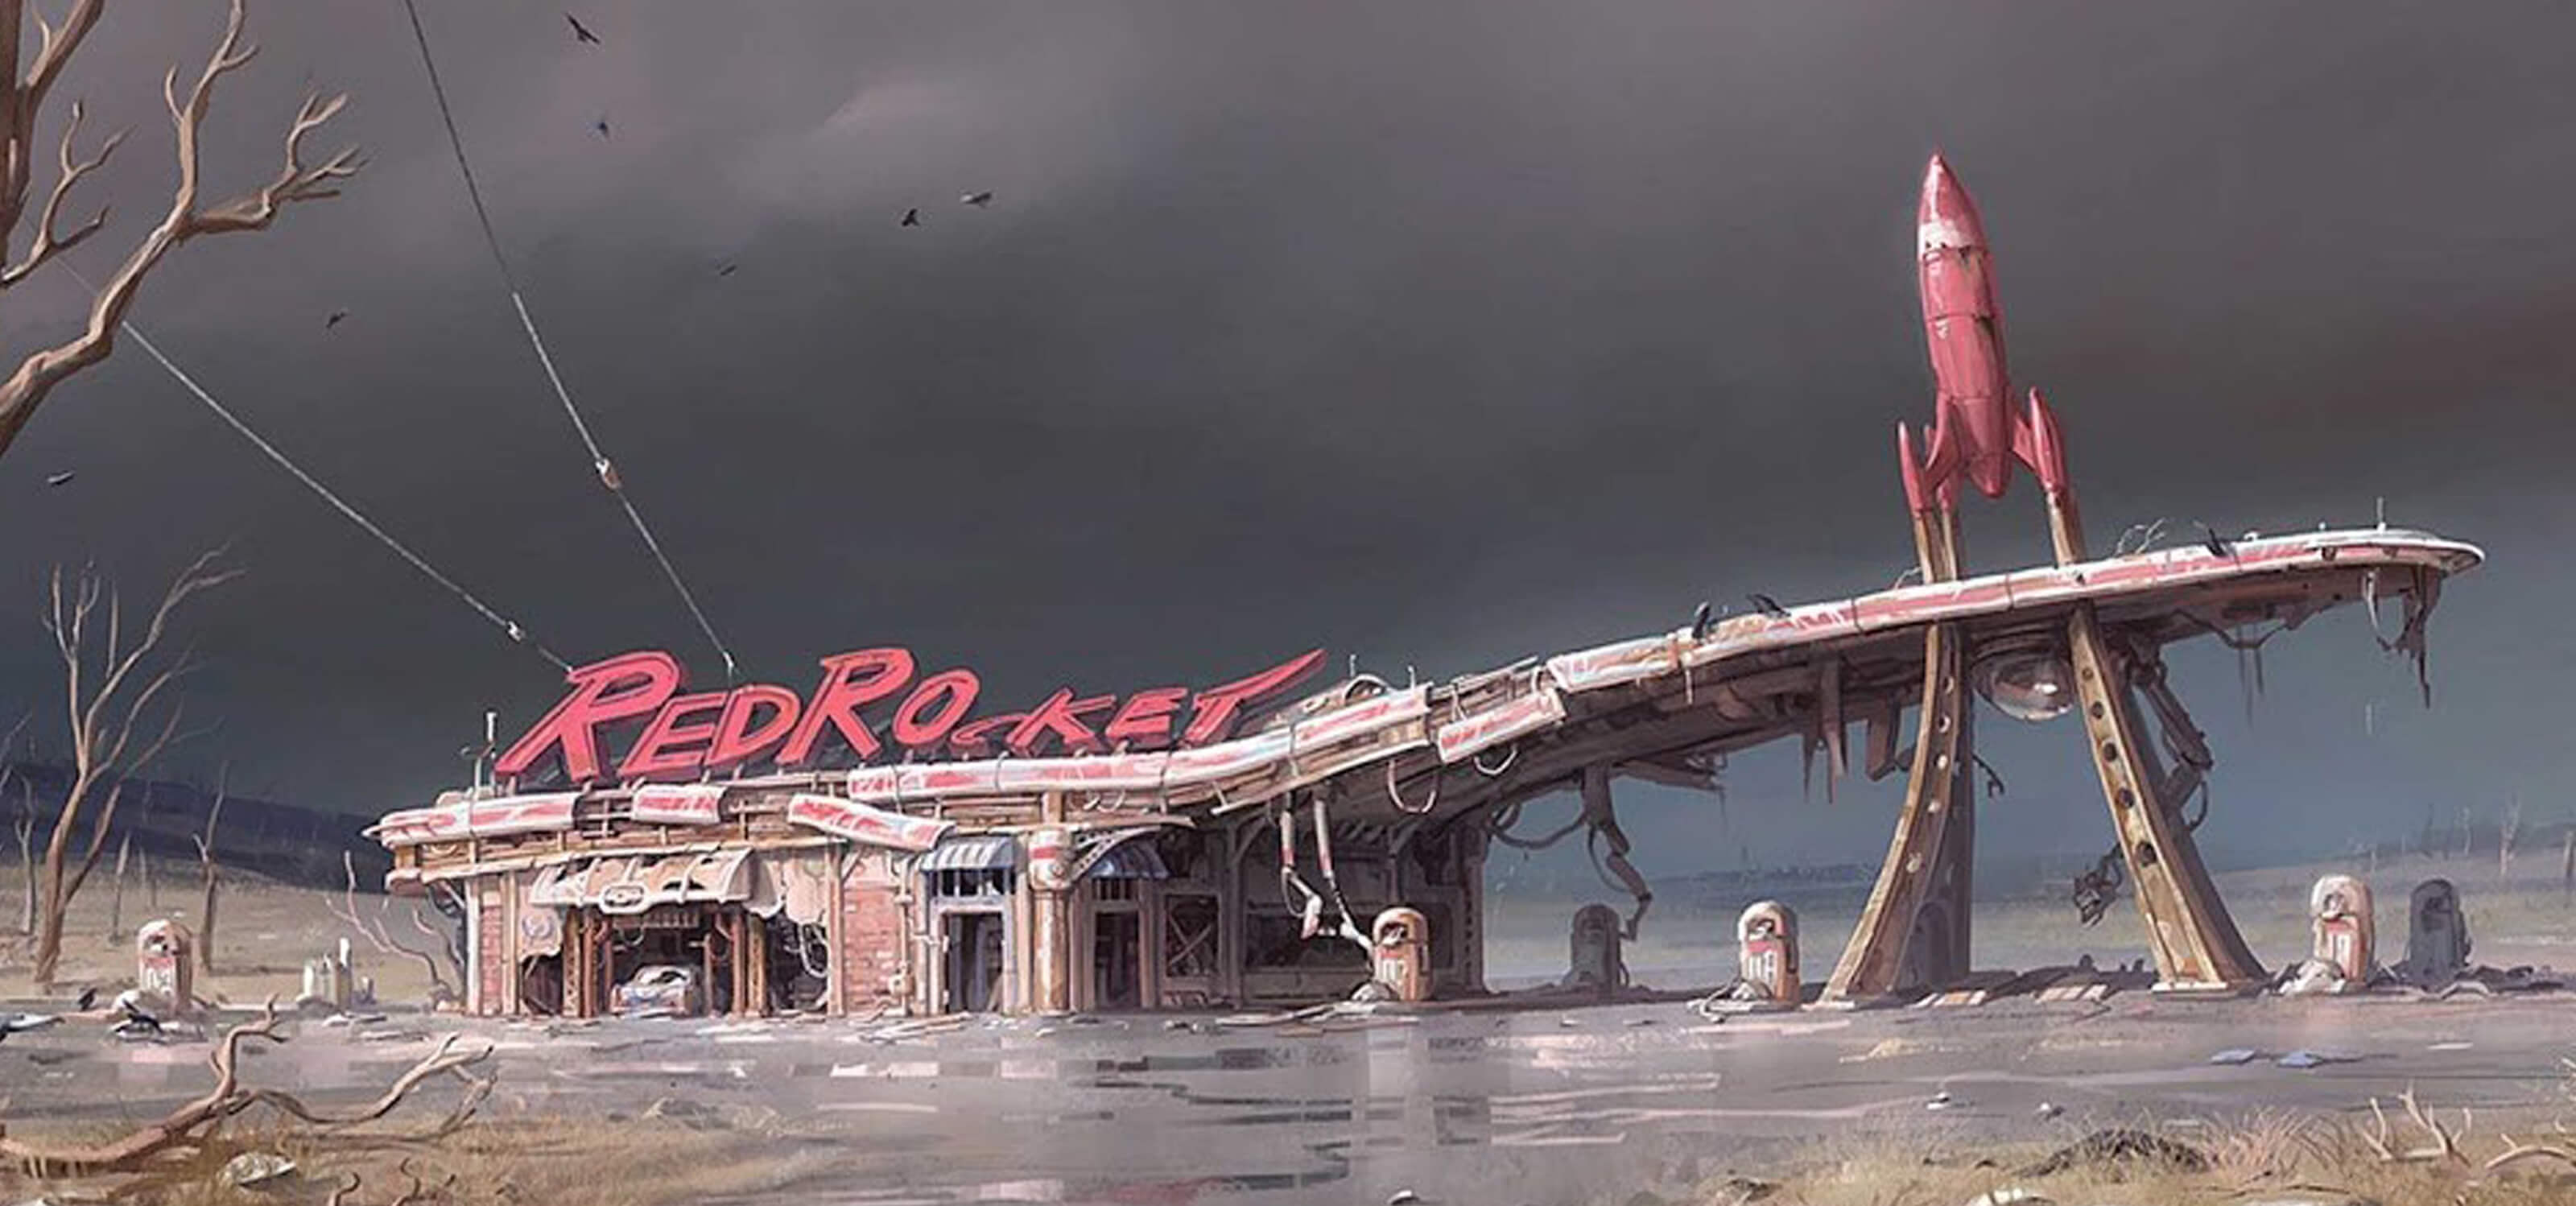 Illustration of the Red Rocket gas station in the post-apocalyptic wasteland of Fallout 4 by DigiPen grad Ilya Nazarov